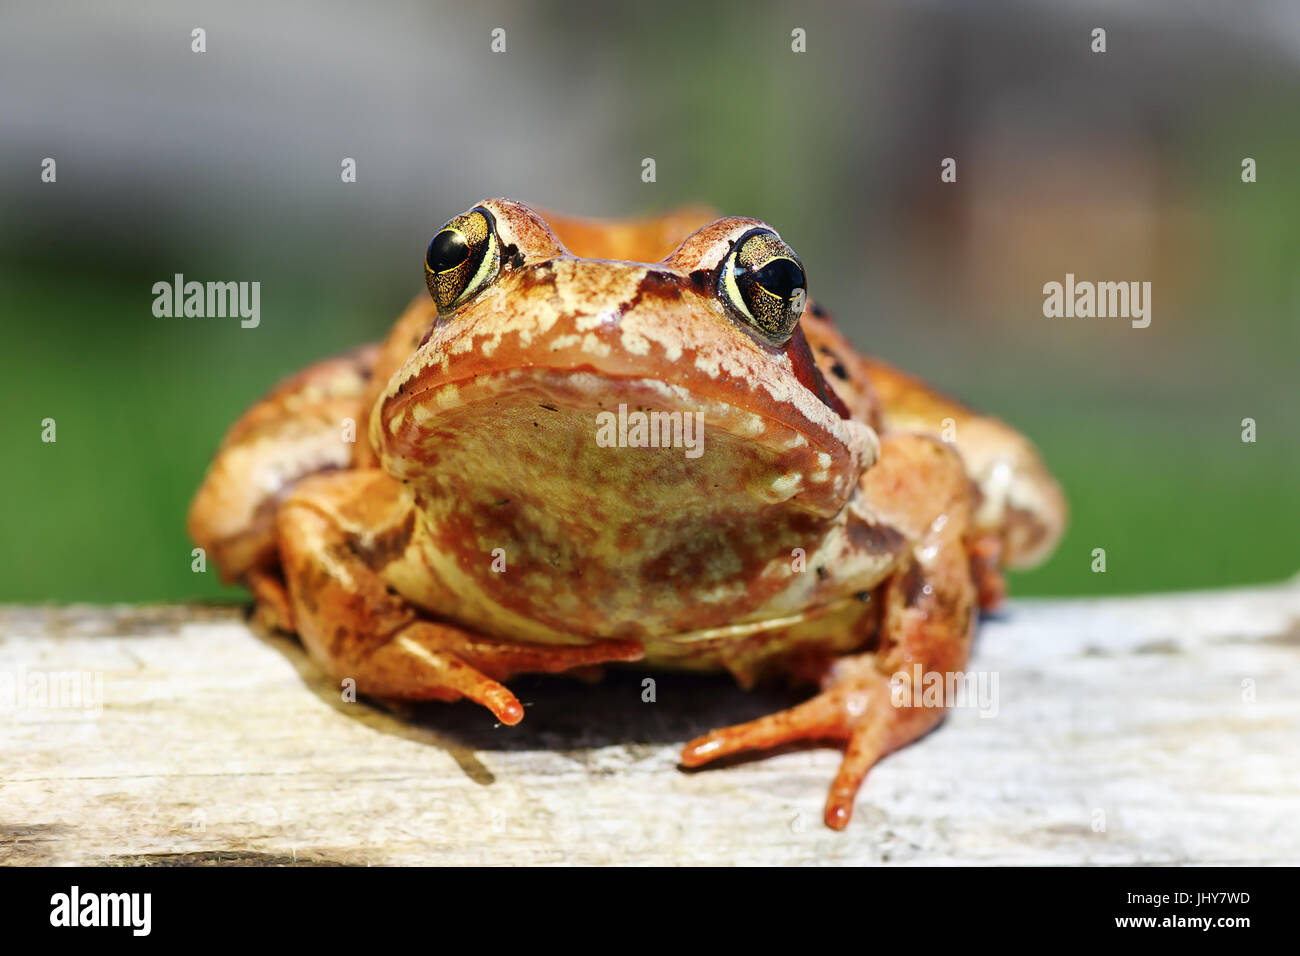 cute portrait of Rana temporaria, the european common brown frog, animal looking at the camera Stock Photo